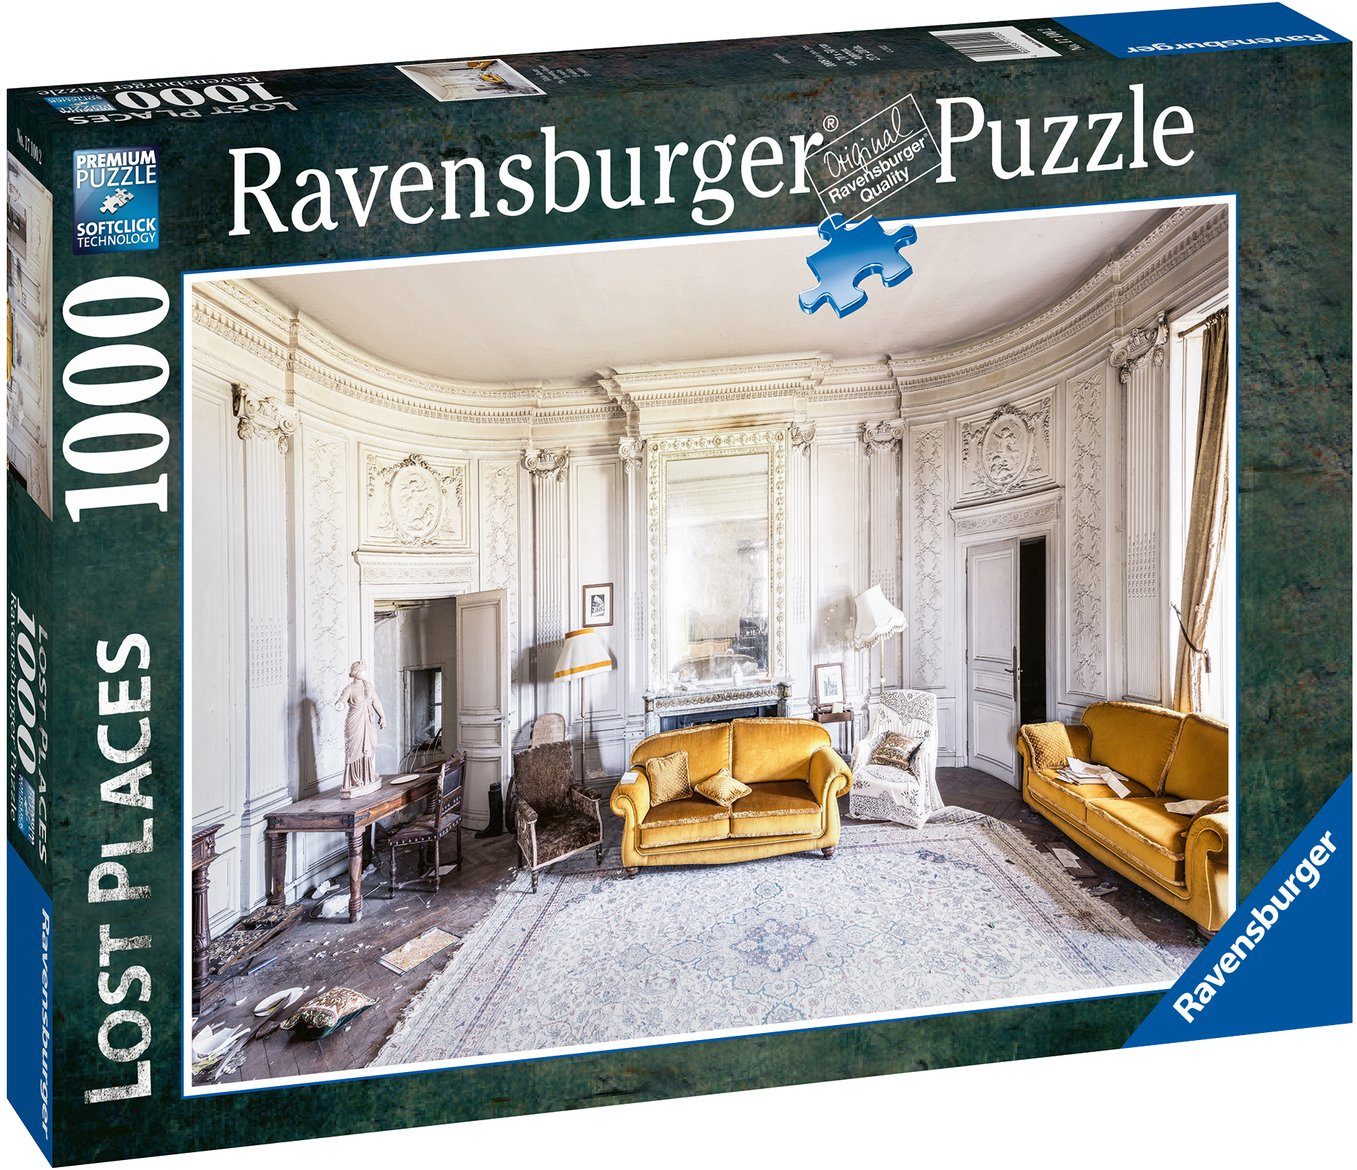 Ravensburger Puzzle 1000 Wald Lost FSC® Puzzleteile, Made Germany, Places, in schützt - White - weltweit Room